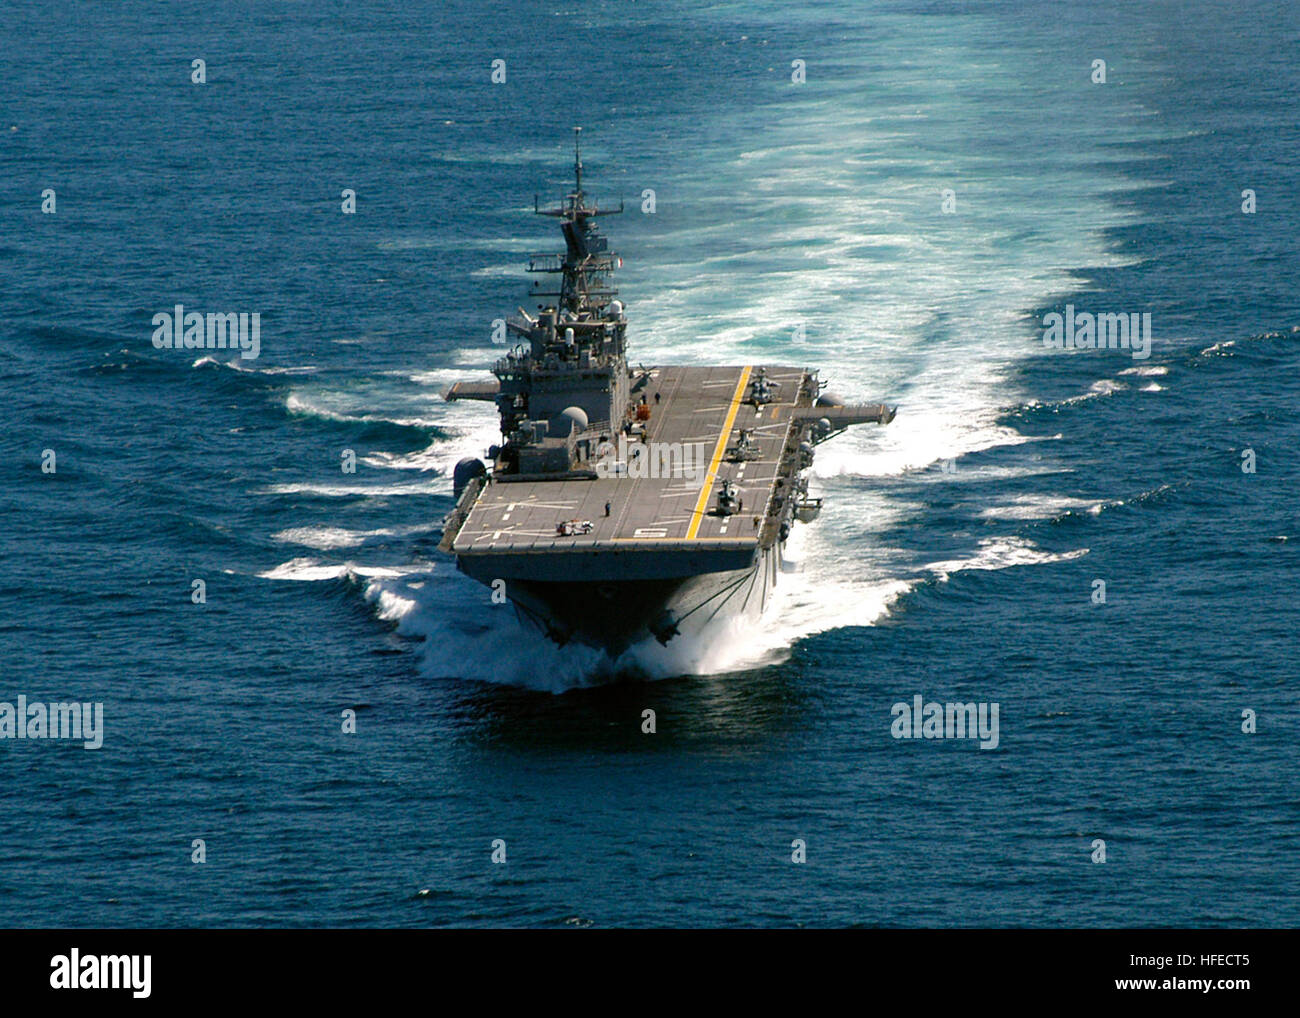 050509-N-8154G-018 Atlantic Ocean (May 9, 2005) – The amphibious assault ship USS Bataan (LHD 5) shown operating in the Atlantic Ocean. U.S. Navy photo by Photographer’s Mate Airman Jeremy L. Grisham (RELEASED) US Navy 050509-N-8154G-018 The amphibious assault ship USS Bataan (LHD 5) shown operating in the Atlantic Ocean Stock Photo